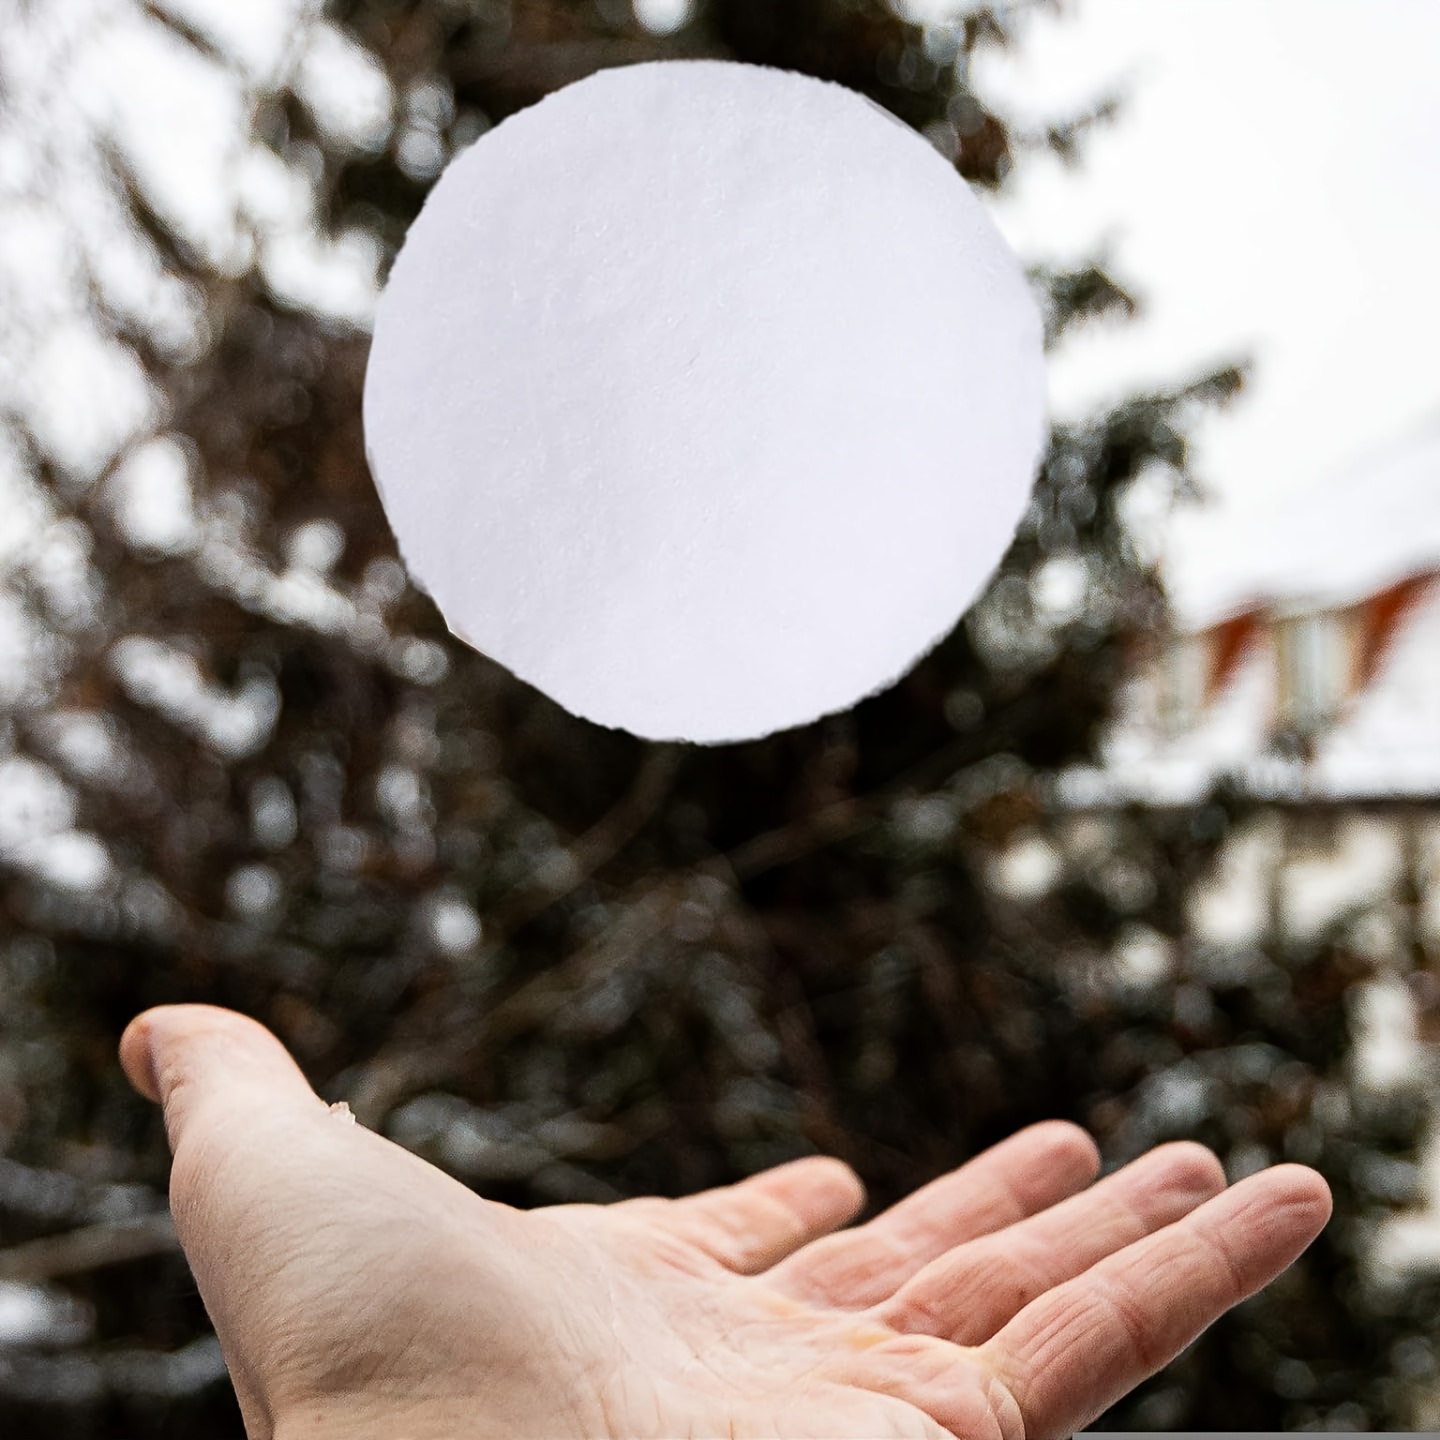 5 Easy Indoor Snowball Party Games